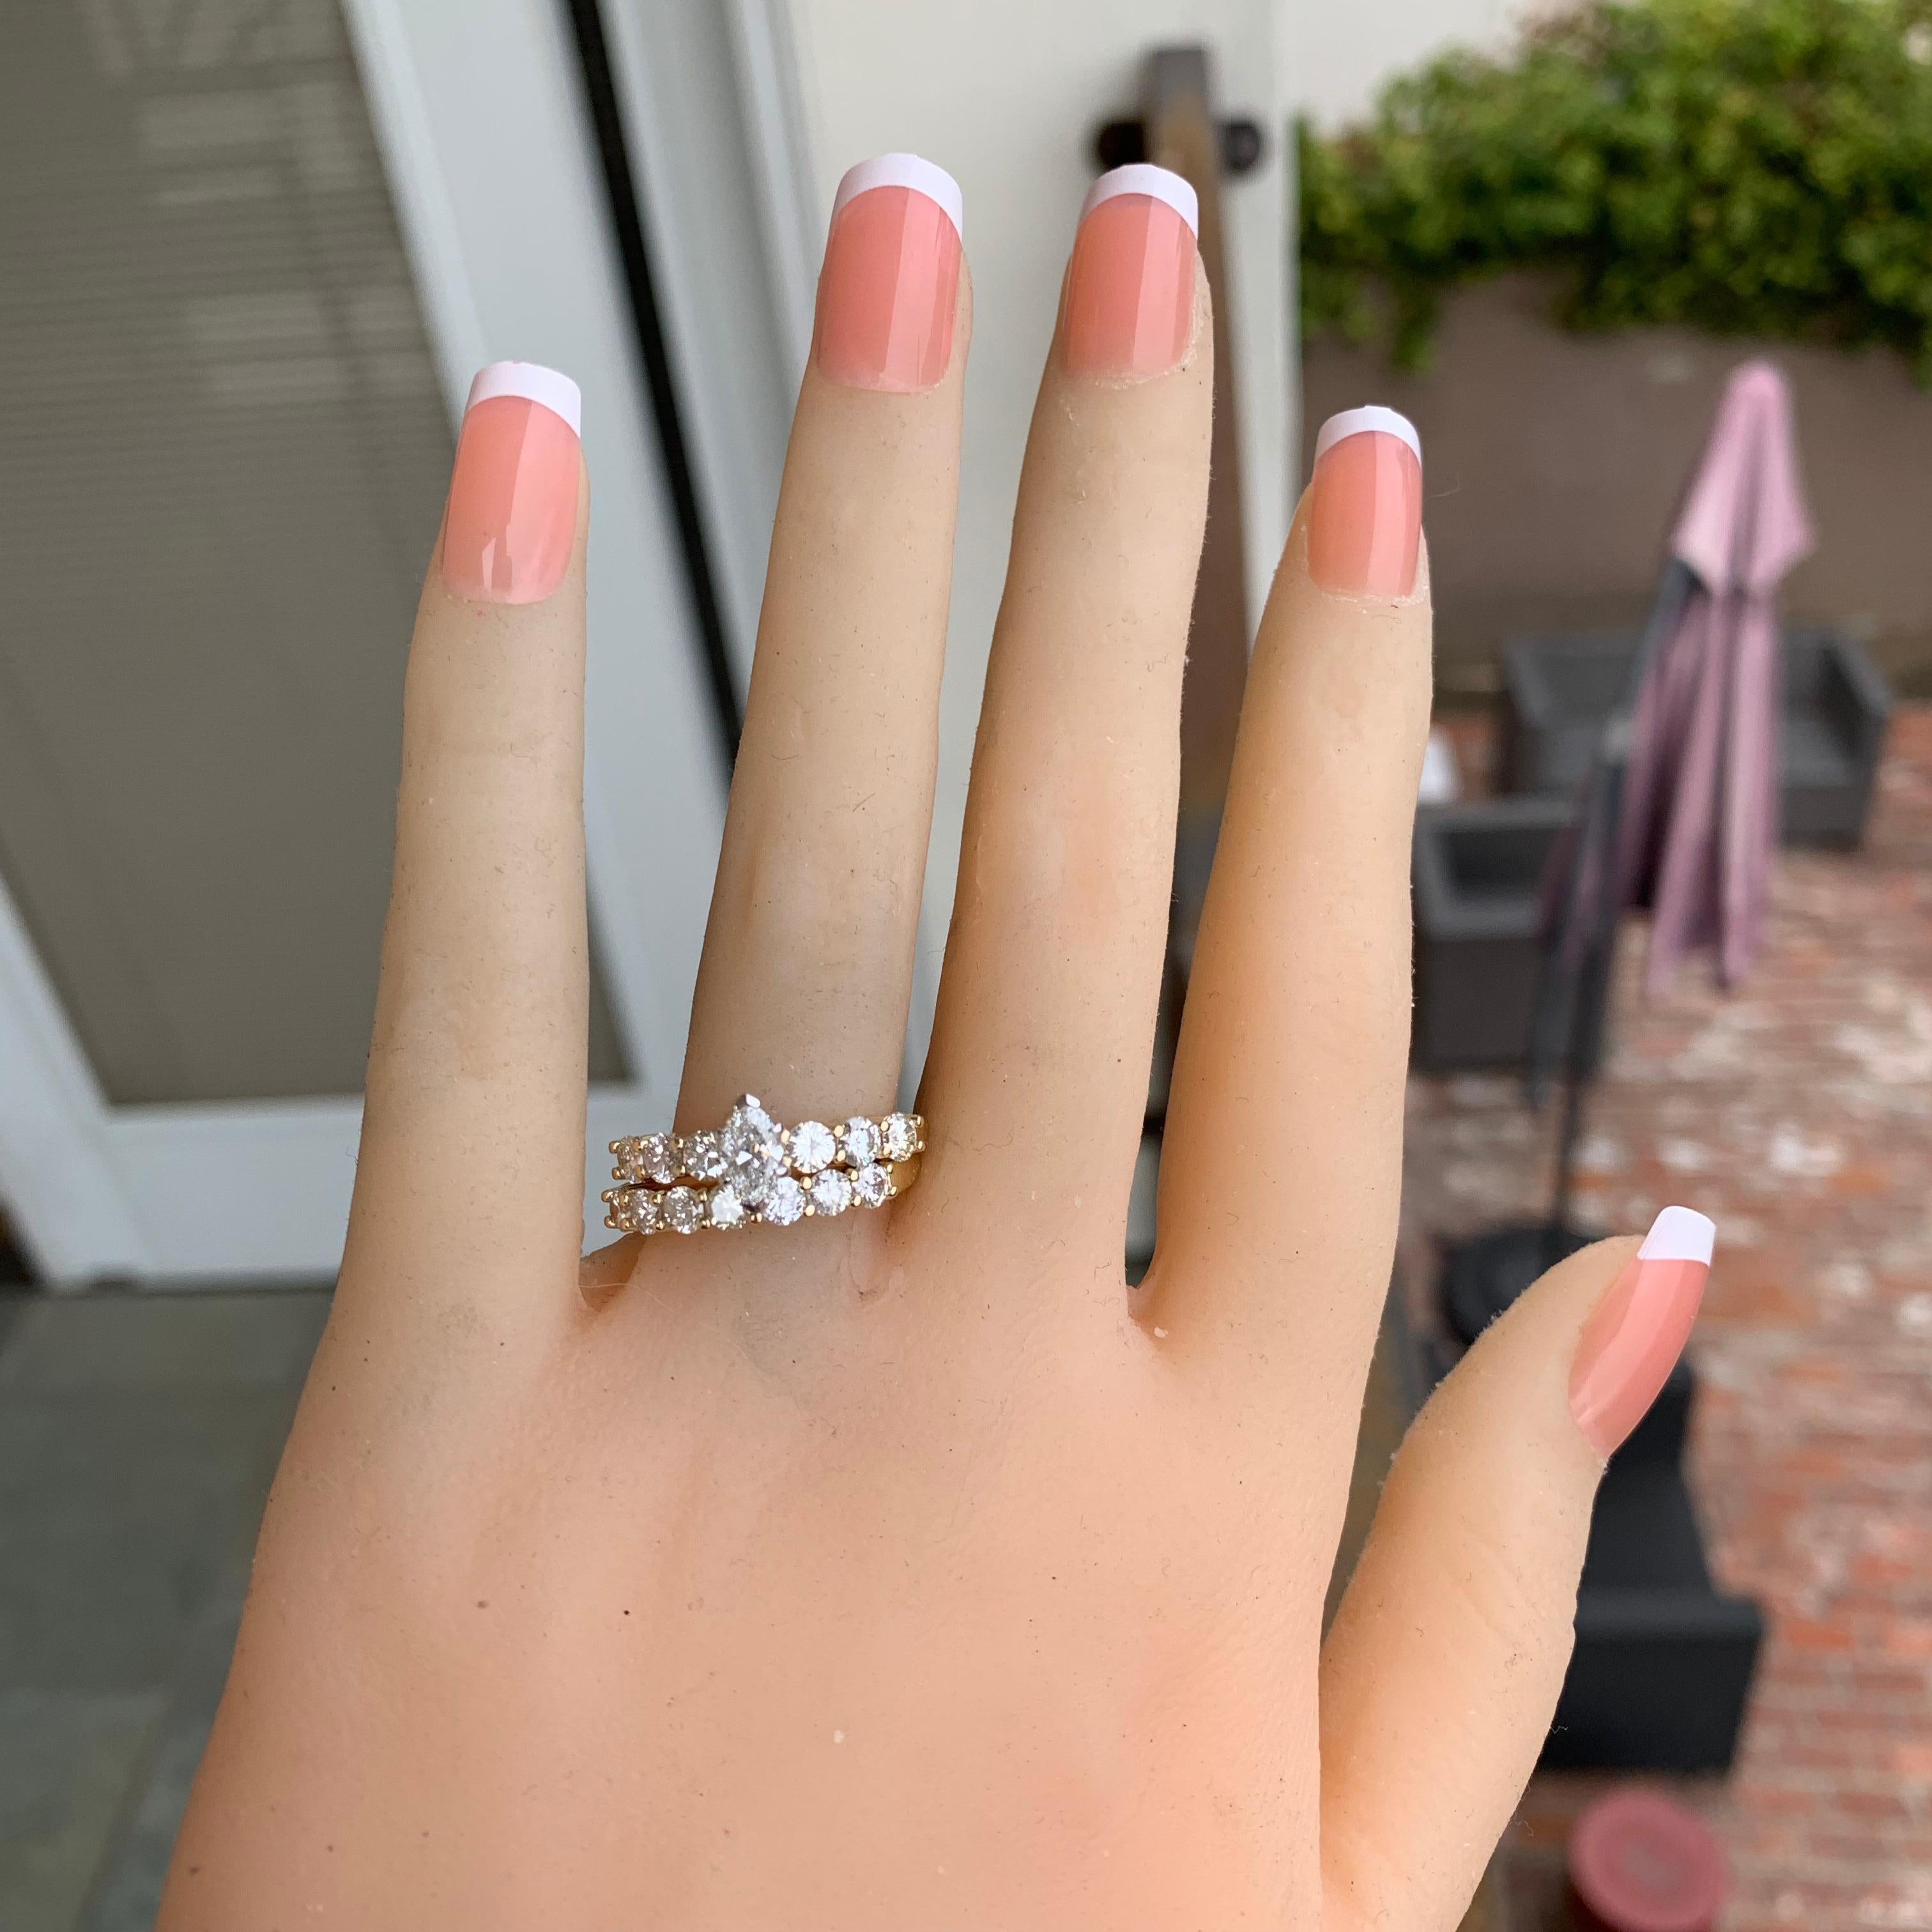 Can be sized to any finger size, ring will be made to order and take approximately 1-3 weeks from customers final design approval. If you need a sooner date let us know and we will see if we can accommodate you. Carat weight and color and clarity of